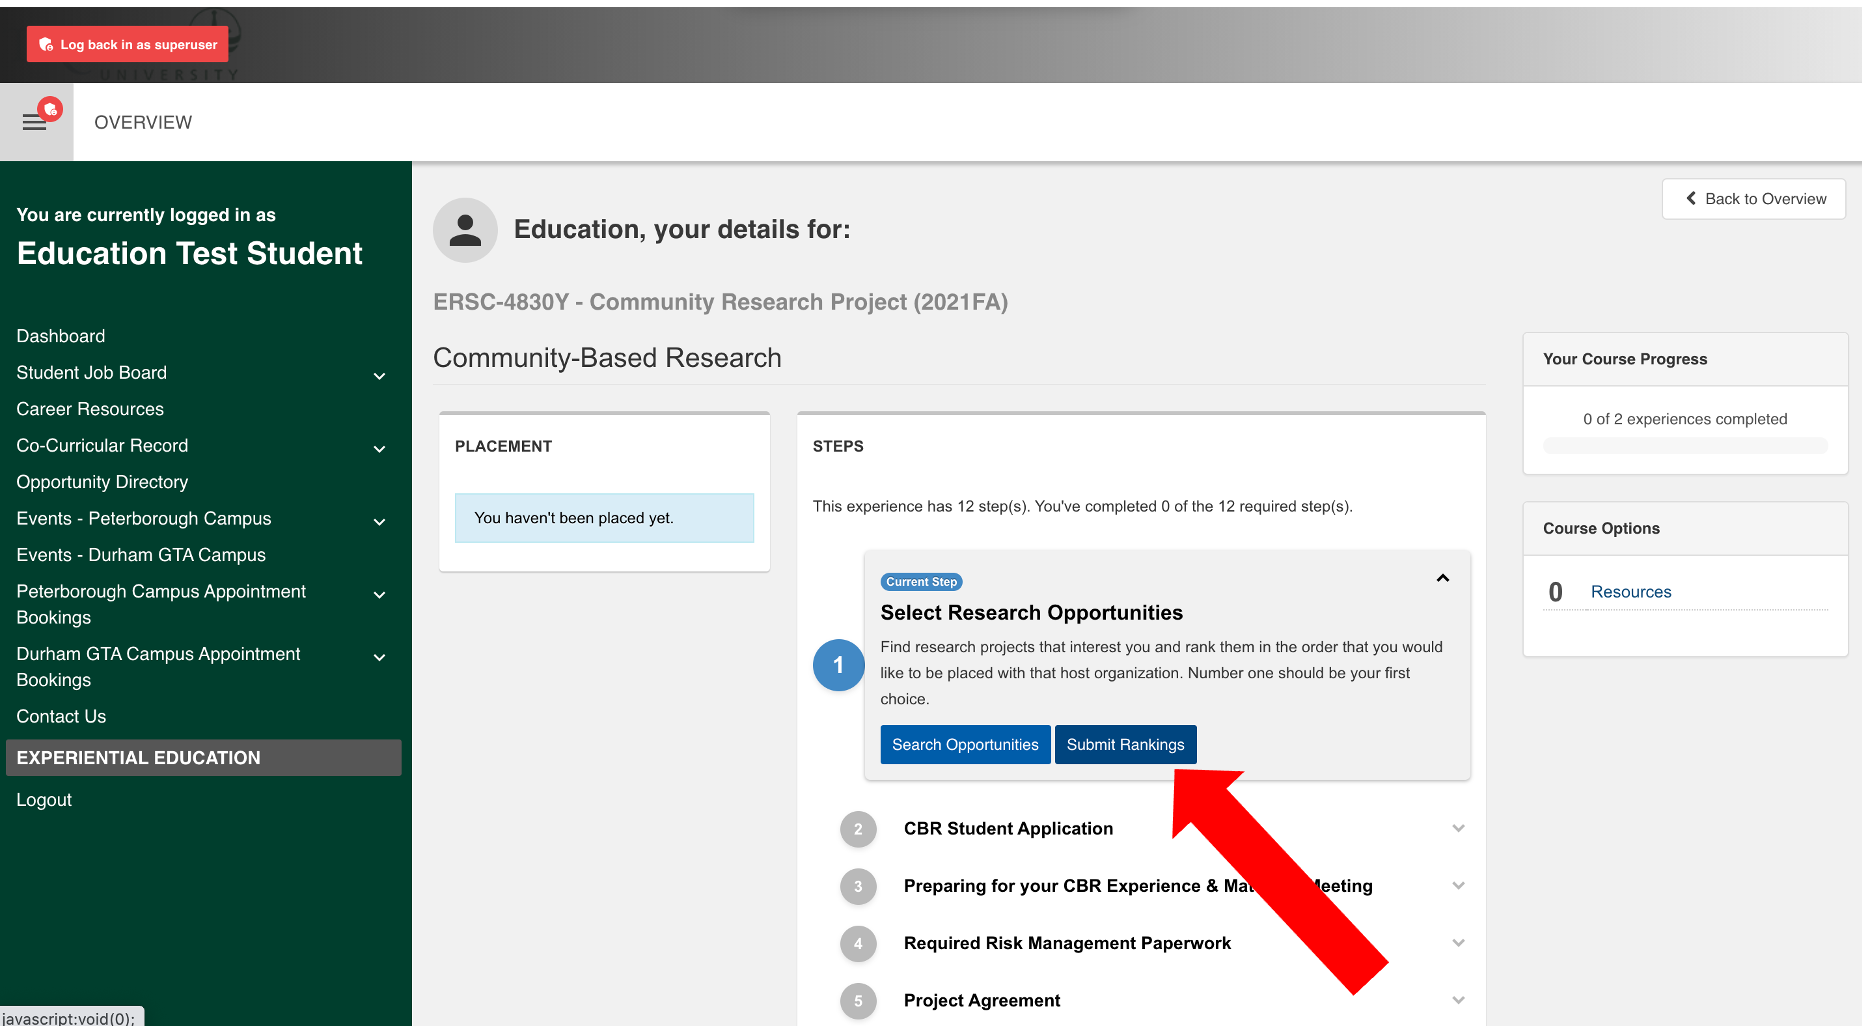 Screenshot of the CBR course from student view. The student is on Step 1: Select Research Opportunities. There is a red arrow pointing to "Search Opportunities".